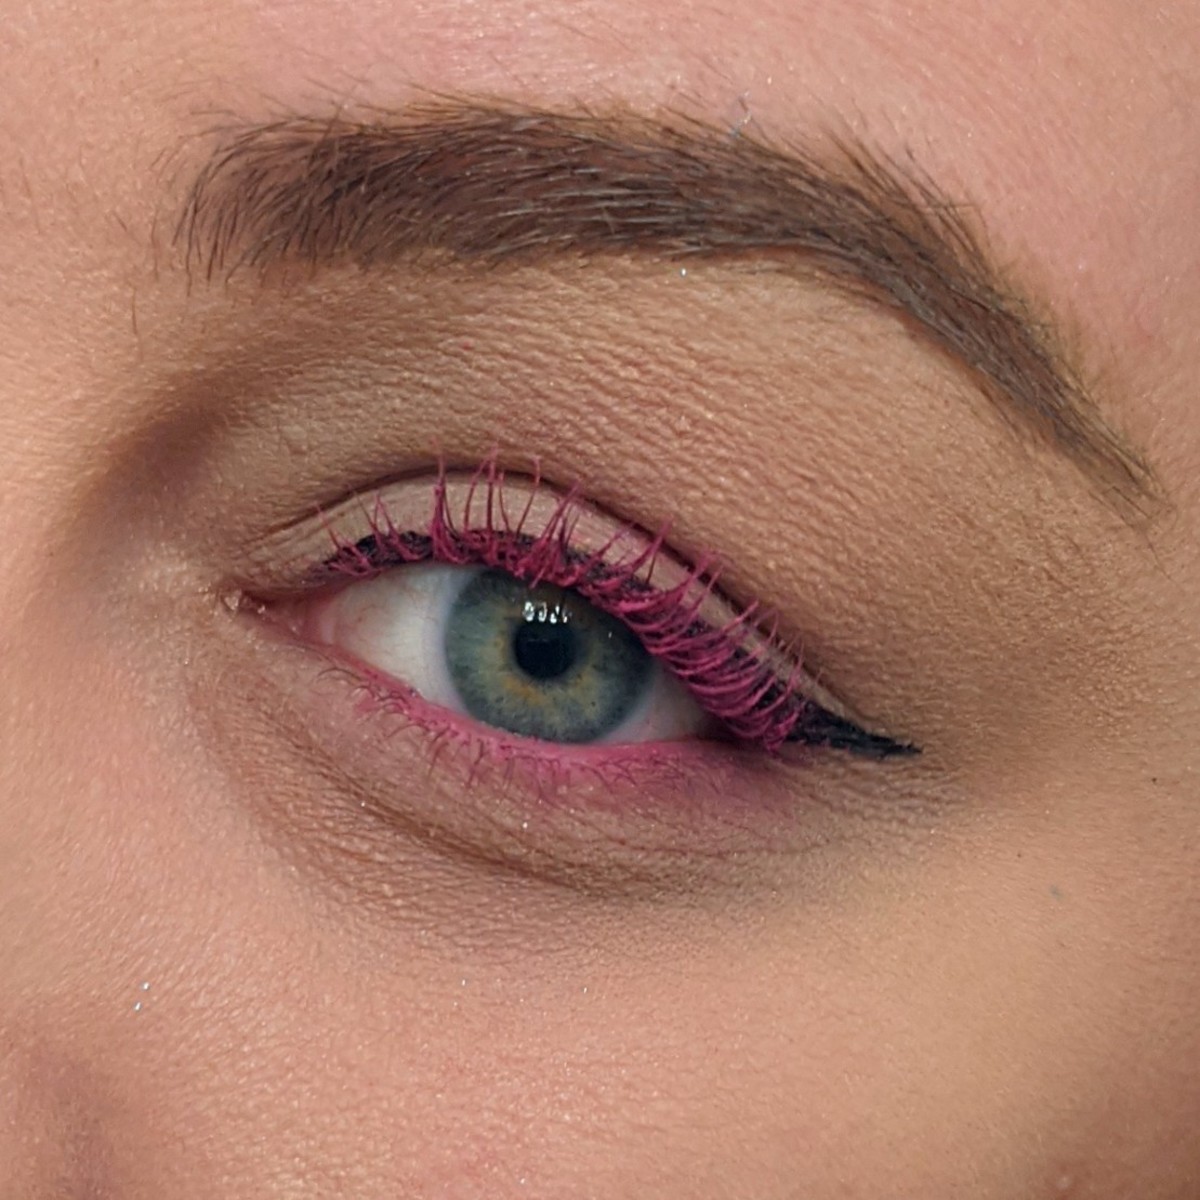 A bright neon pink mascara look I created using neon pink eyeshadow from Urban Decay's Wired Palette with Tarte Opening Act Lash Primer.